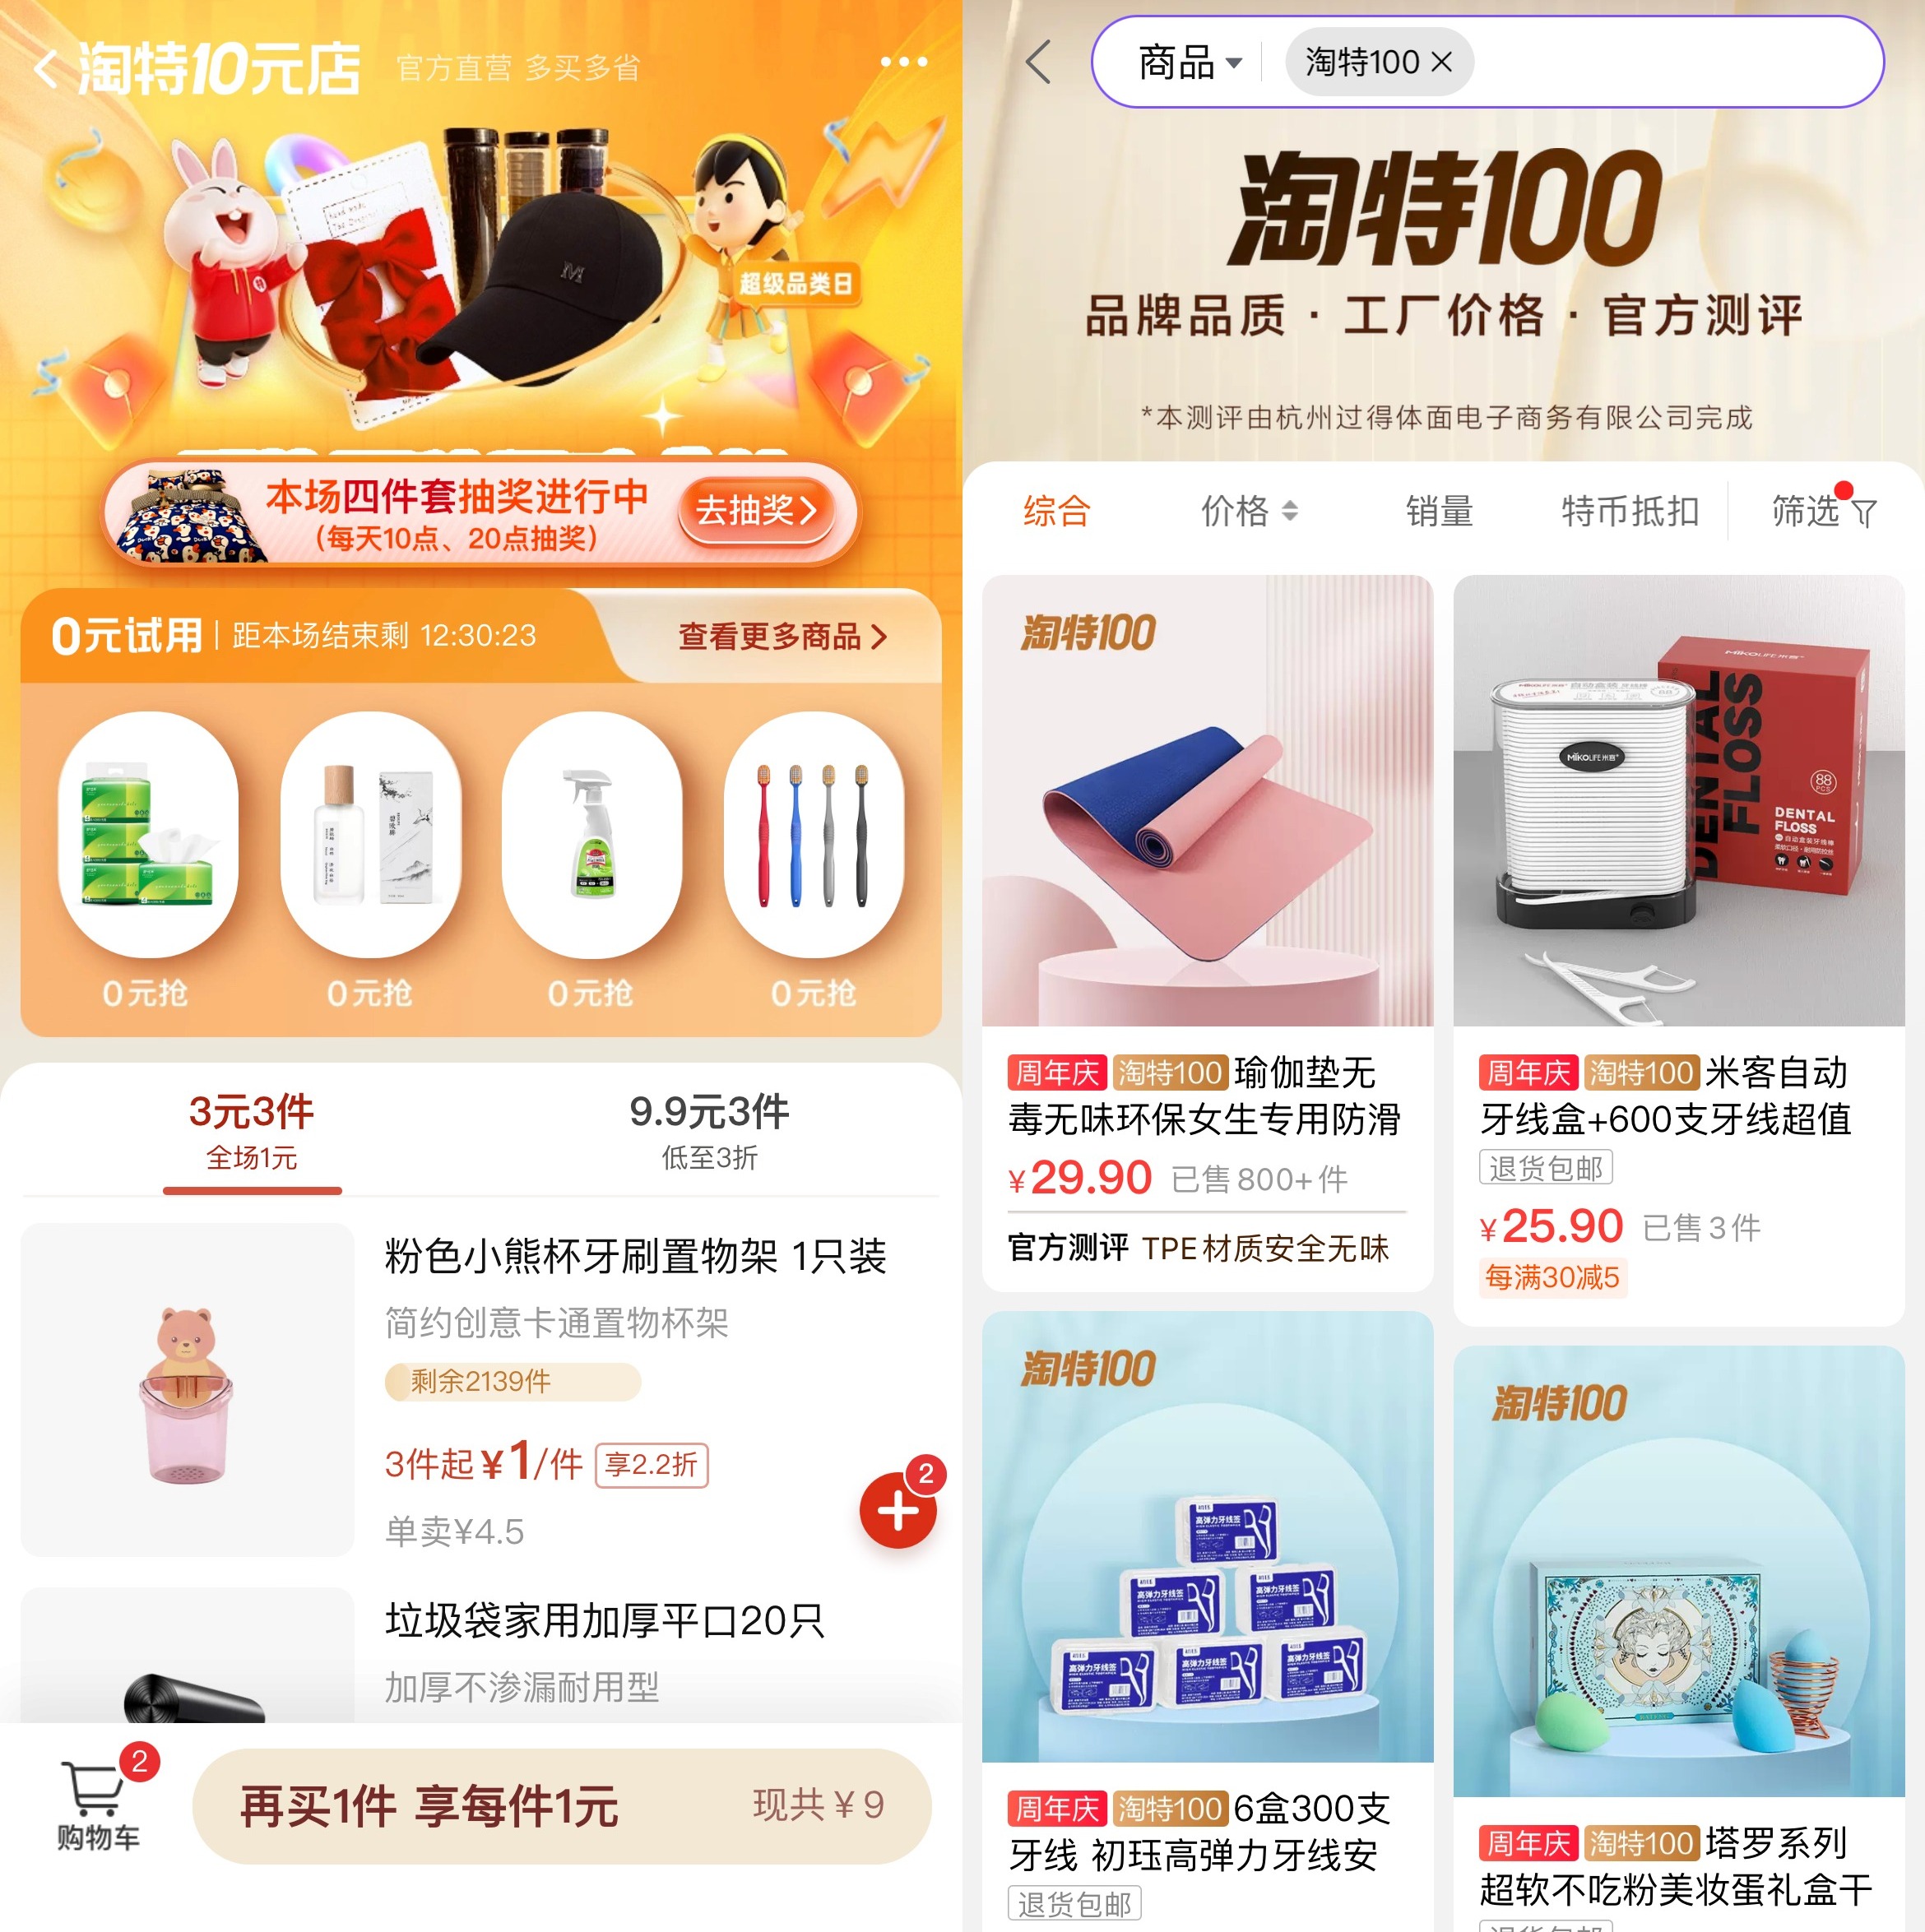 Taobao Deals special channels